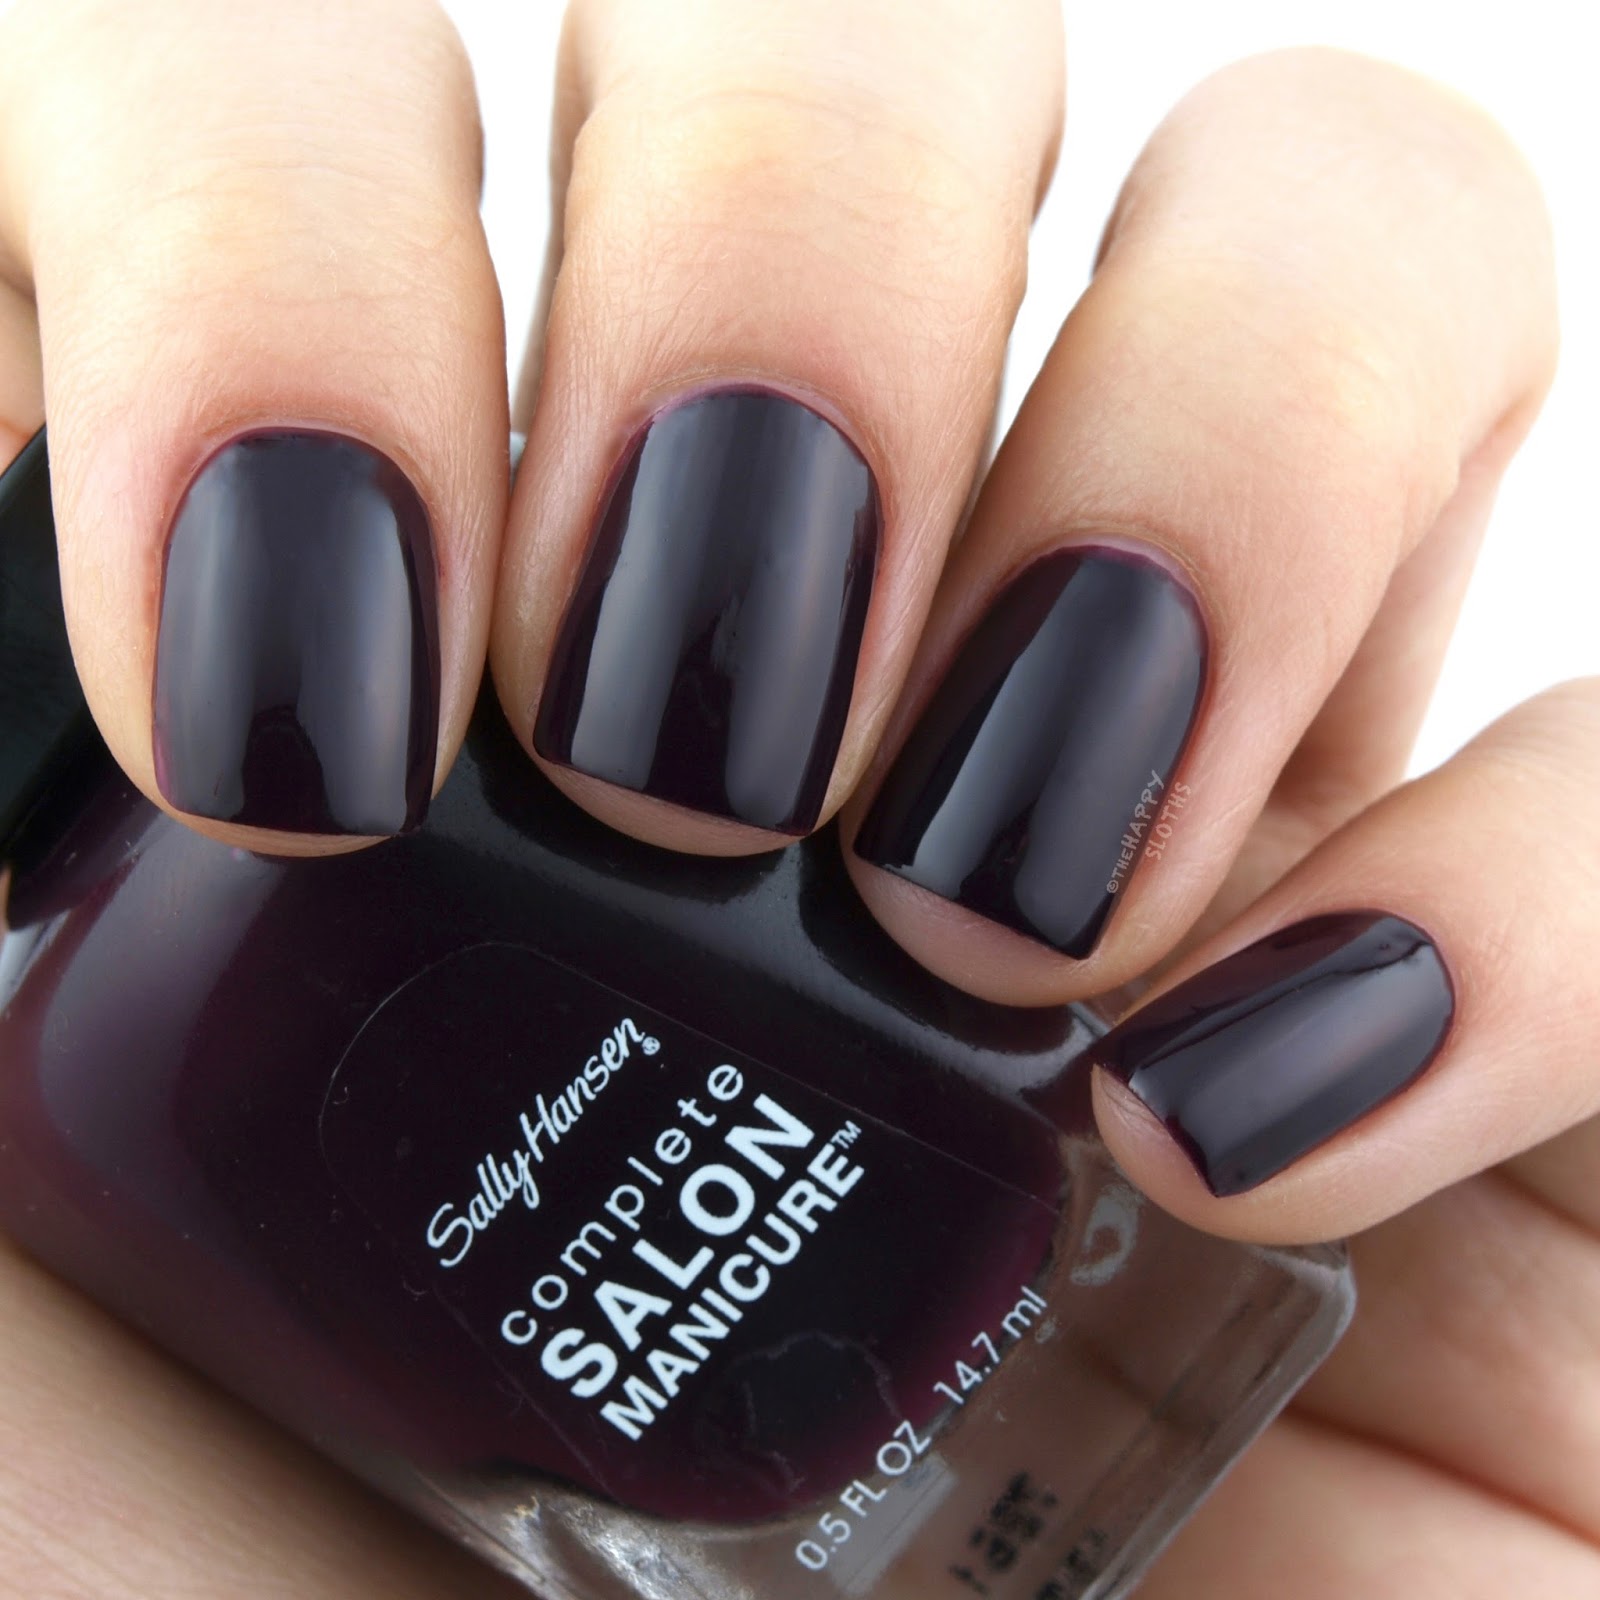 Sally Hansen Complete Salon Manicure Berry Chic Collection | Pat on the Black: Review and Swatches